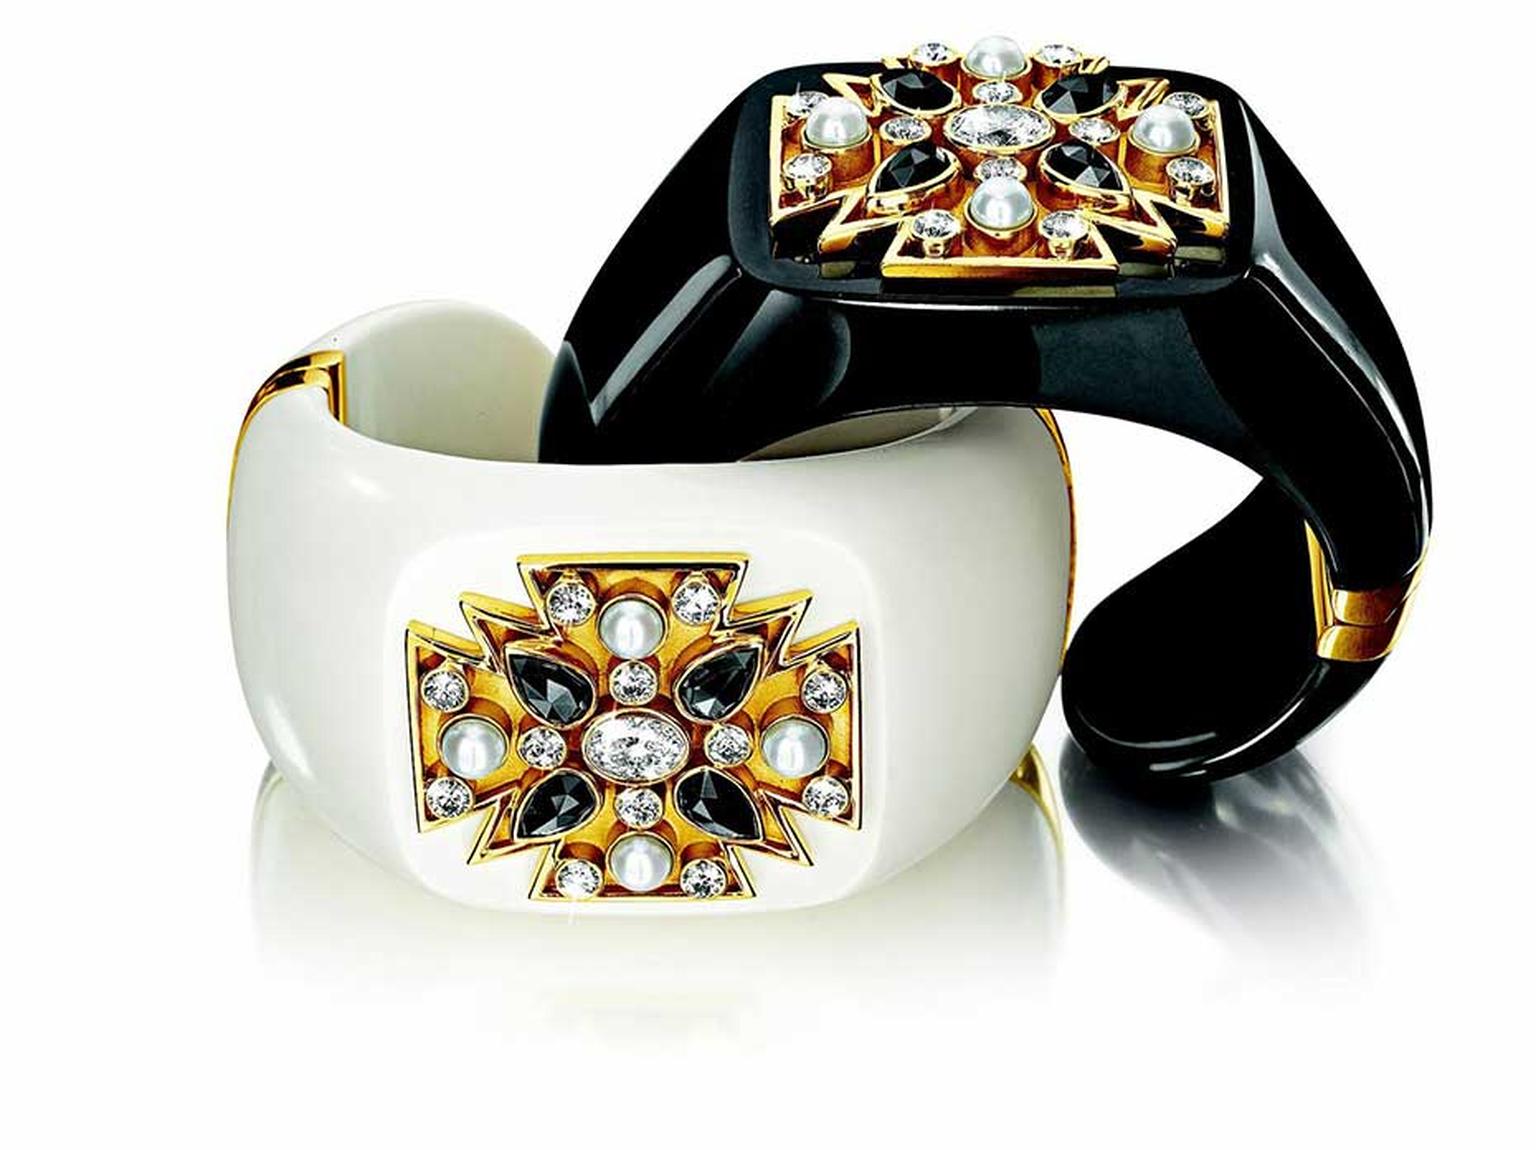 Verdura Maltese cuff featuring mammoth ivory or black jade with diamonds, pearls and gold.